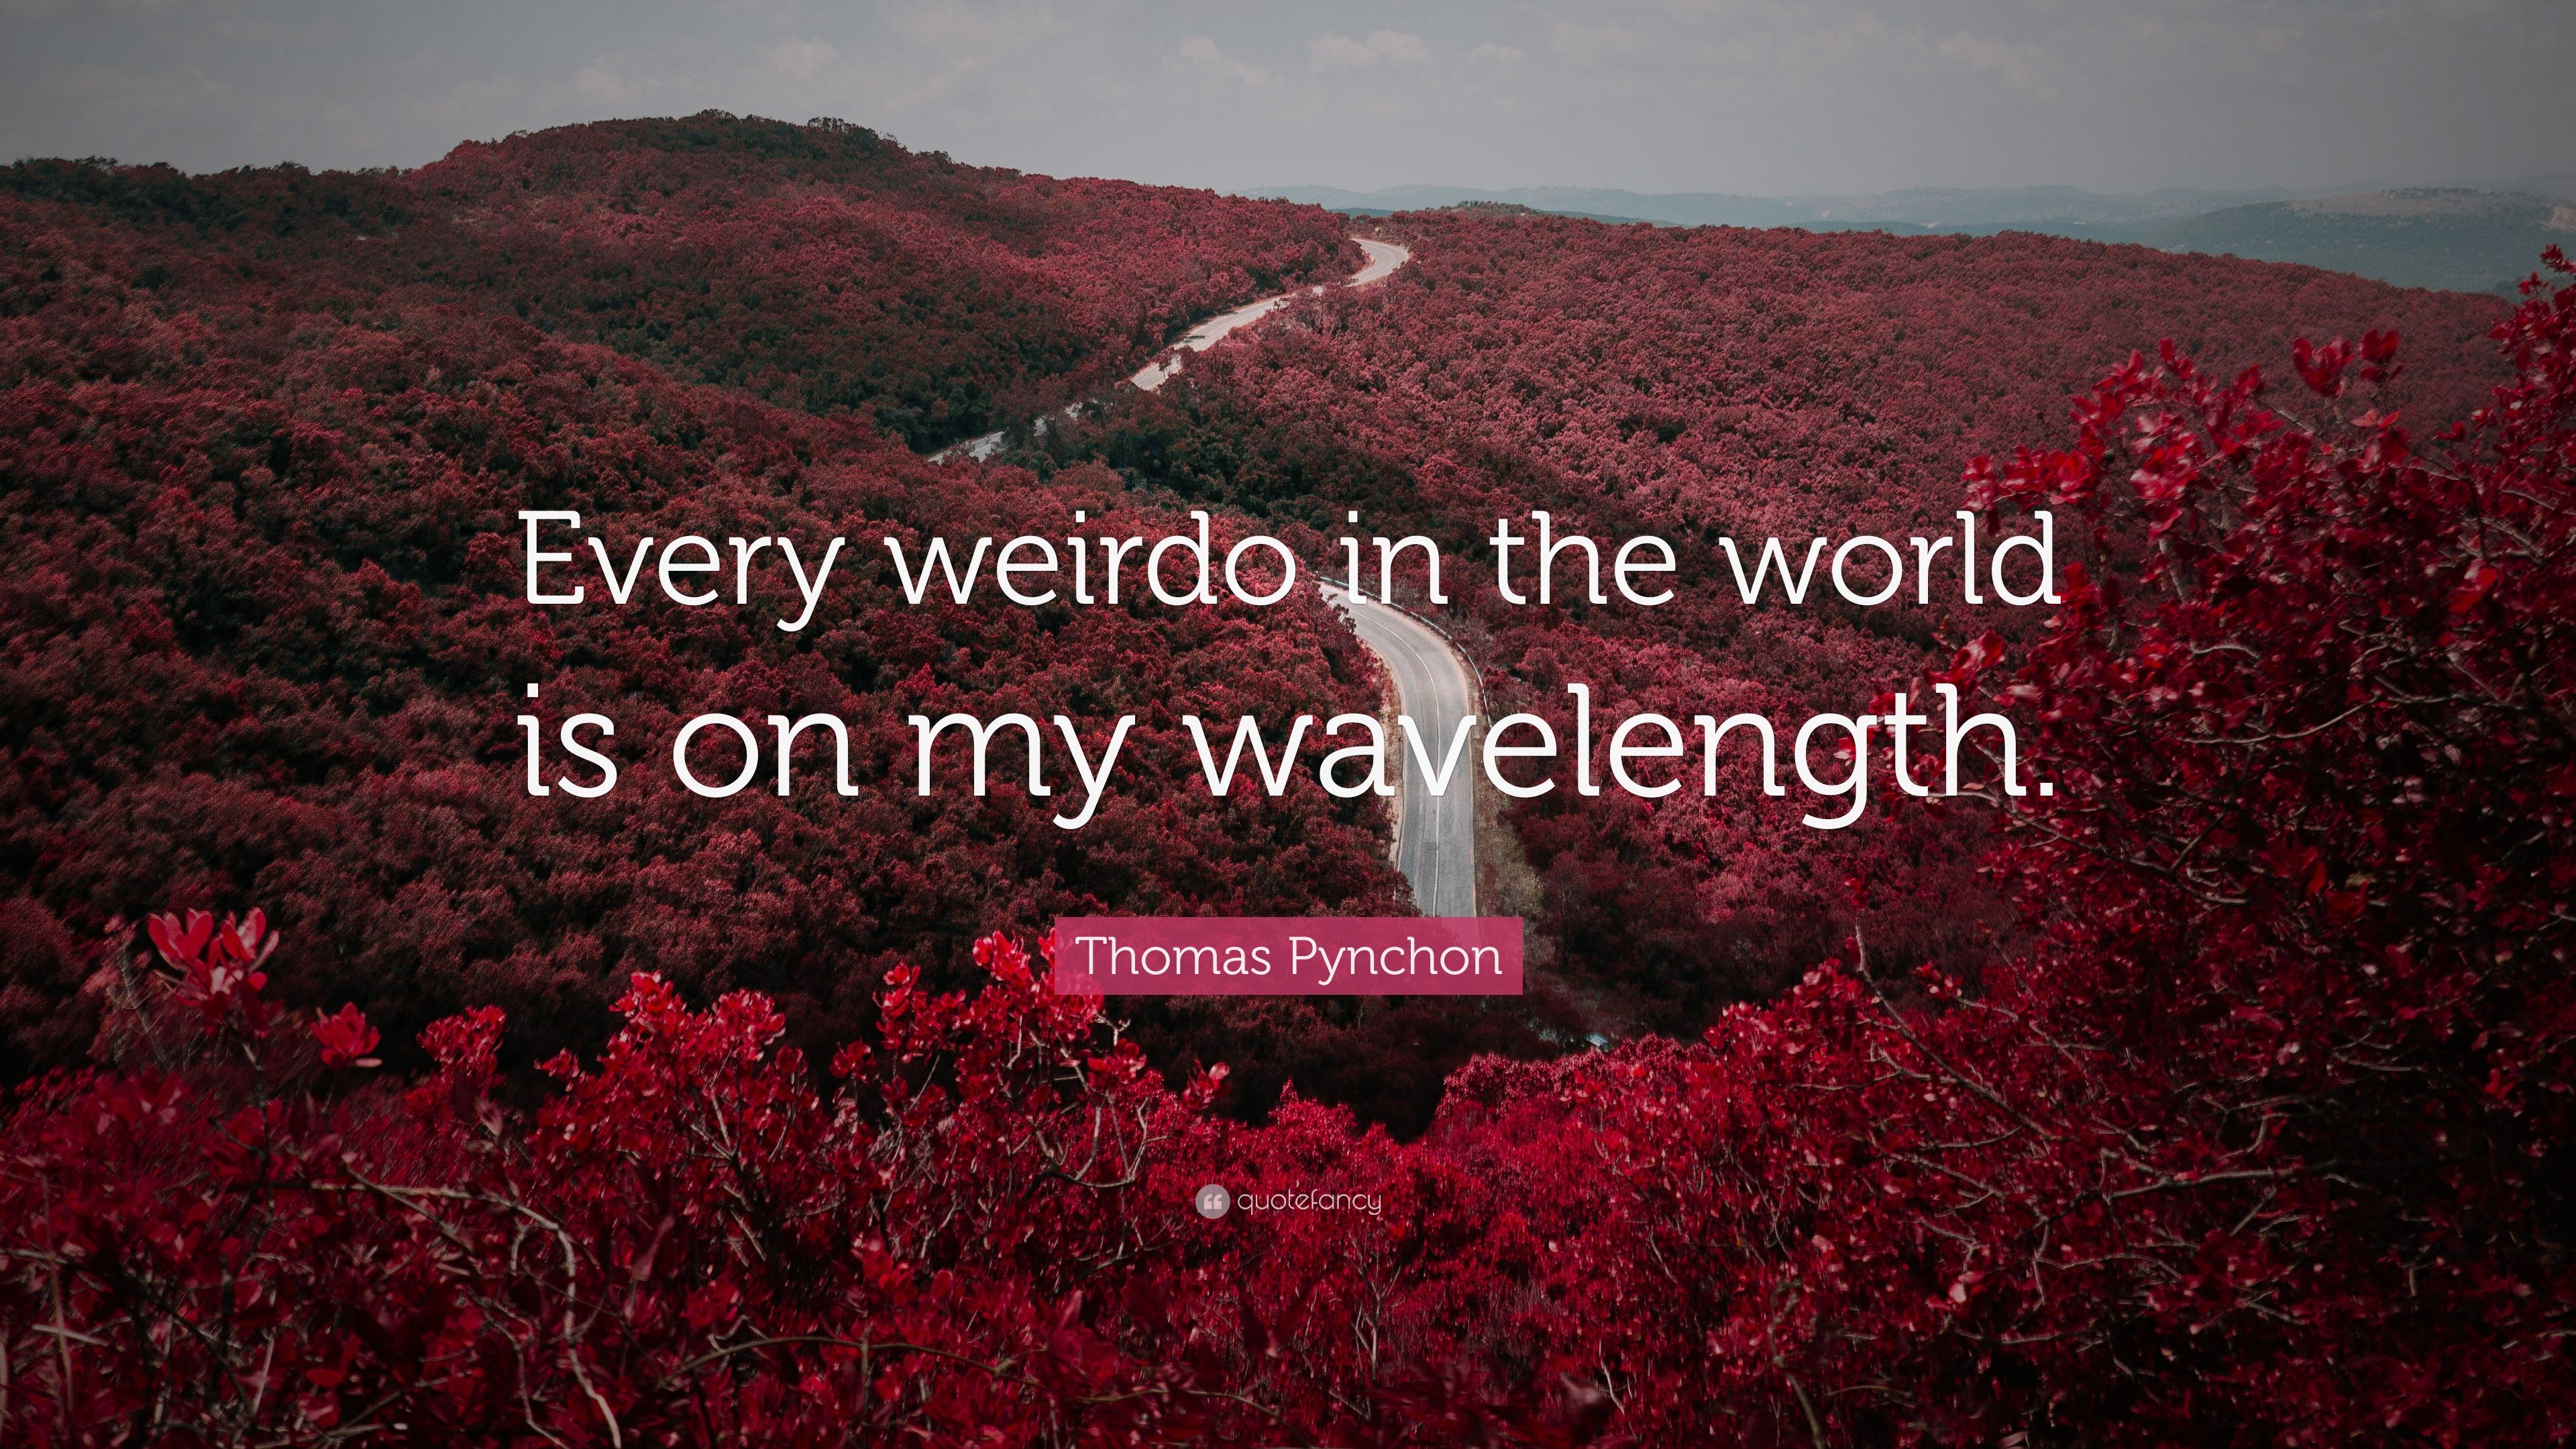 Thomas Pynchon Quote: “Every weirdo in .quotefancy.com